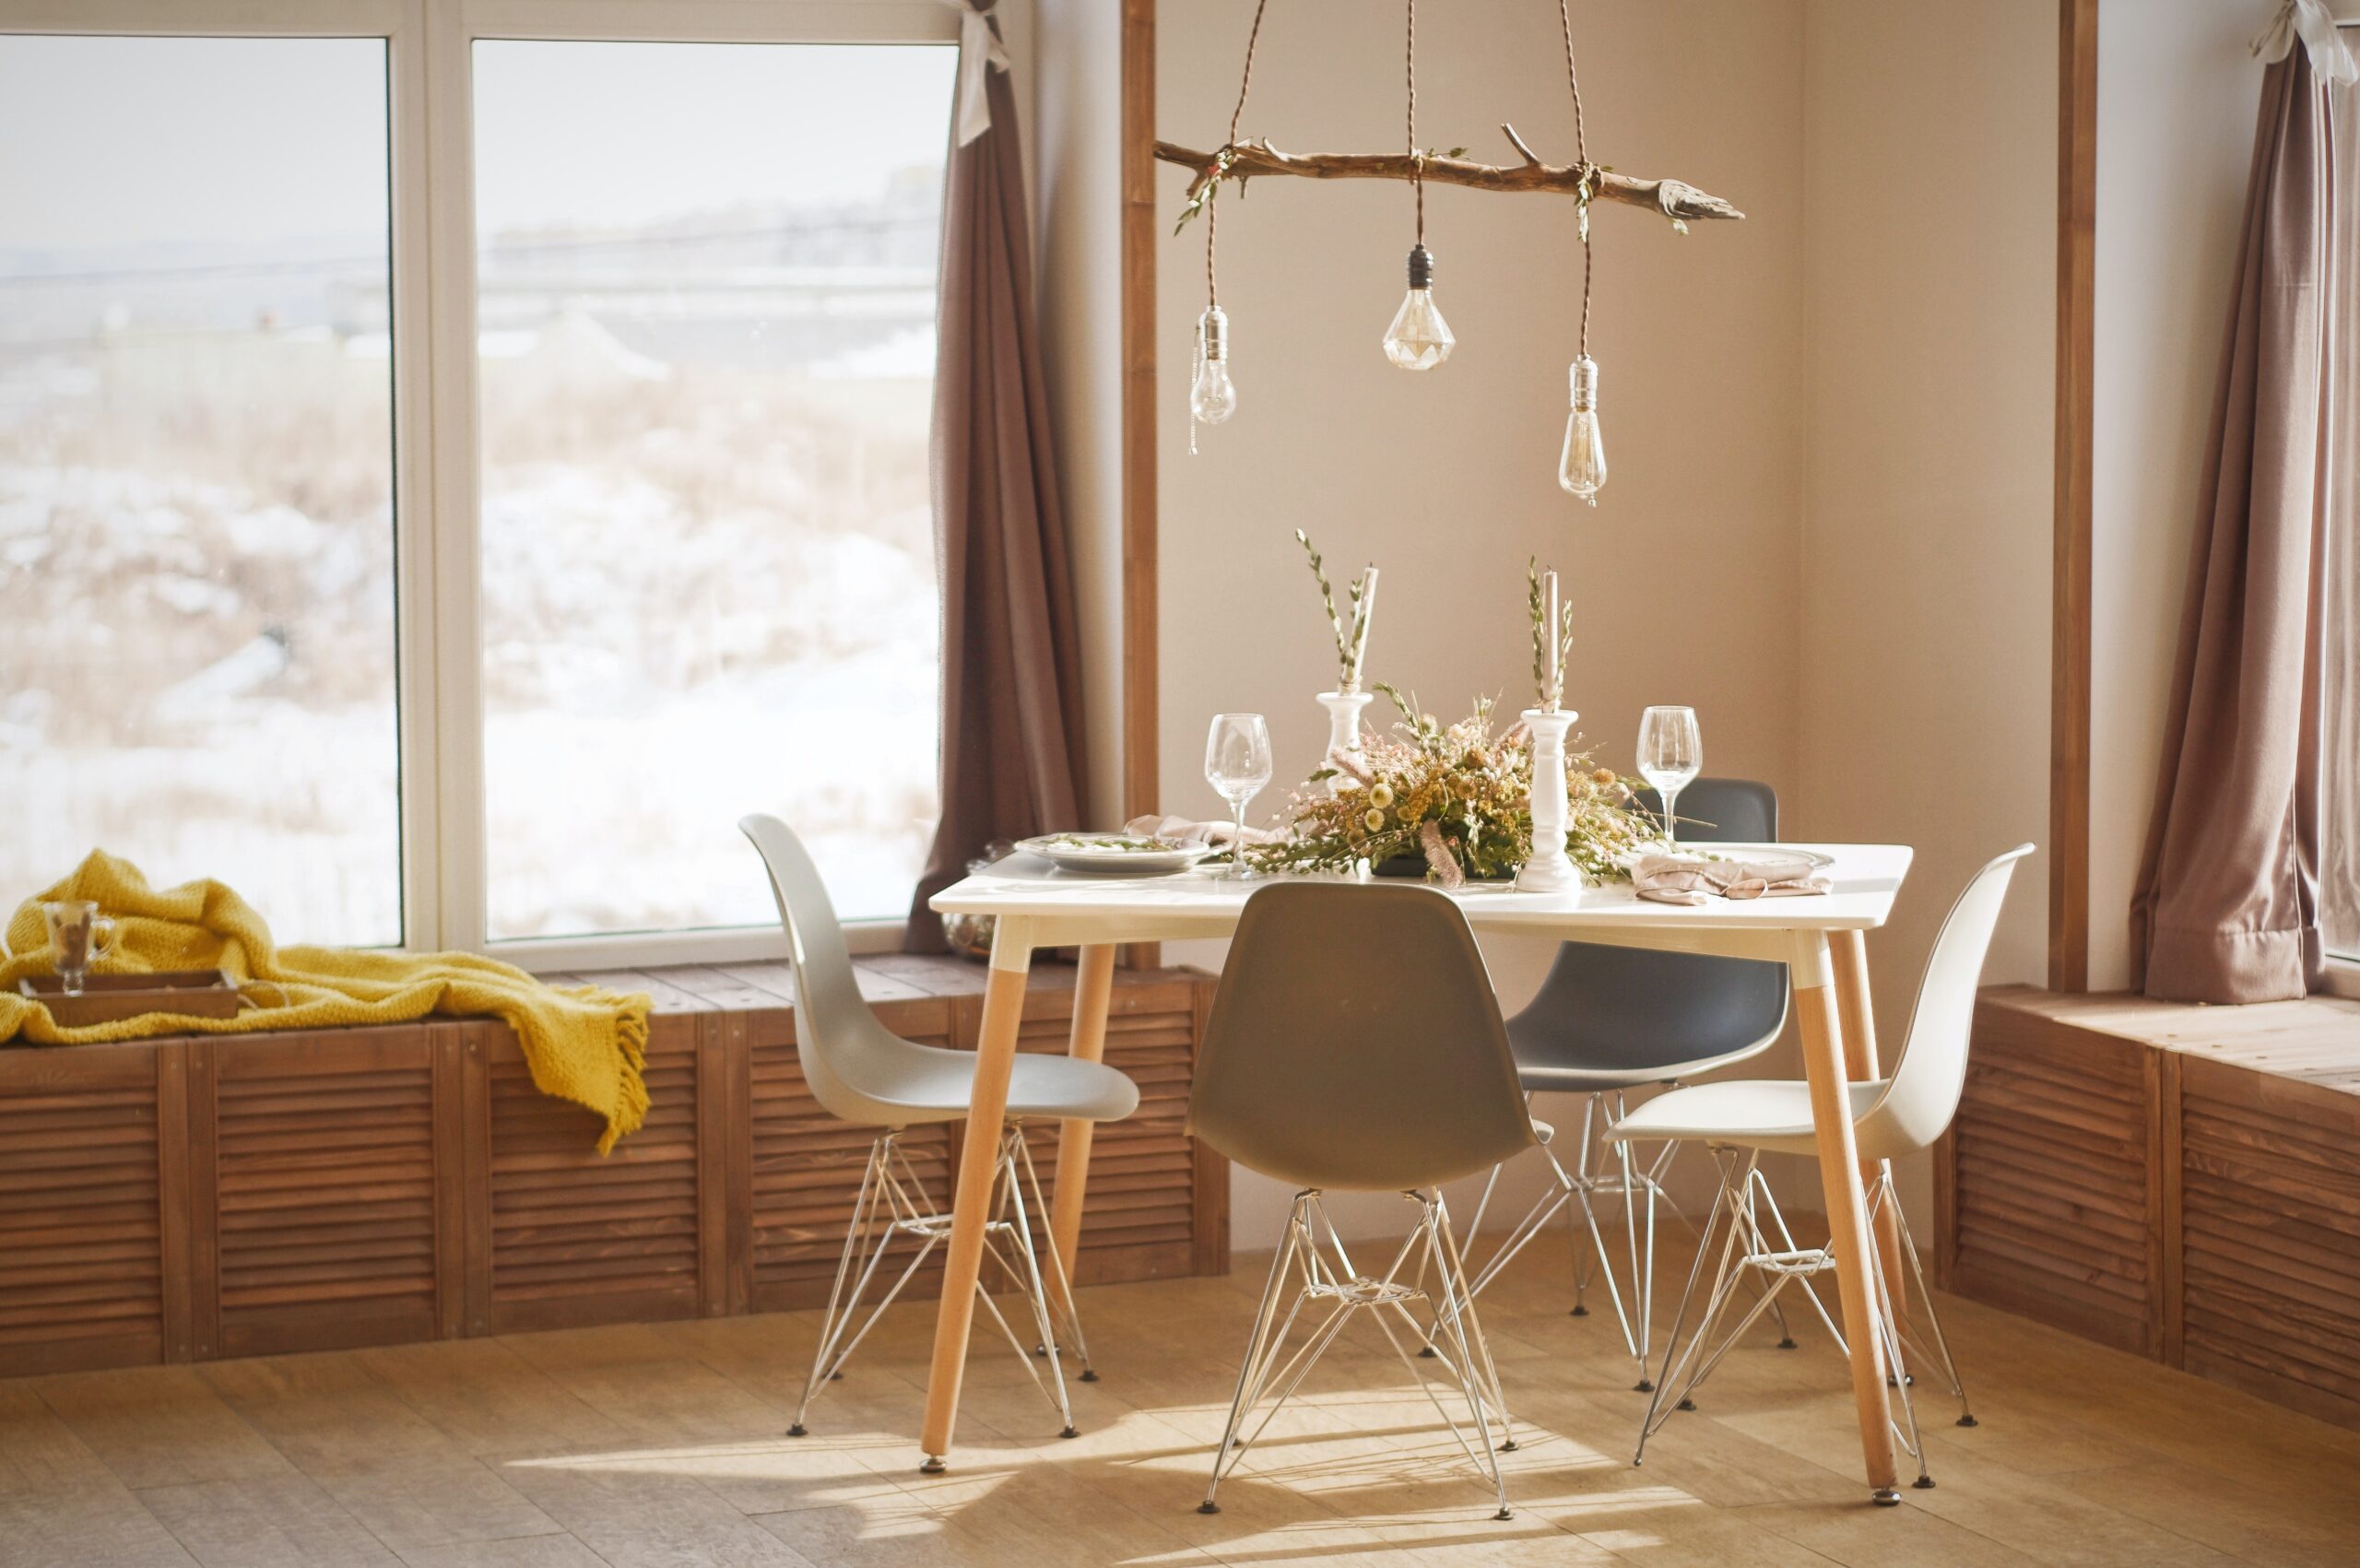 A white table with wooden legs in a light room during daytime. There is a floral centrepiece in the middle of the table. Above the table is a rustic light hanging made from a wooden branch; Rustic Charm Incorporating Rustic Elements into Your Home Interiors